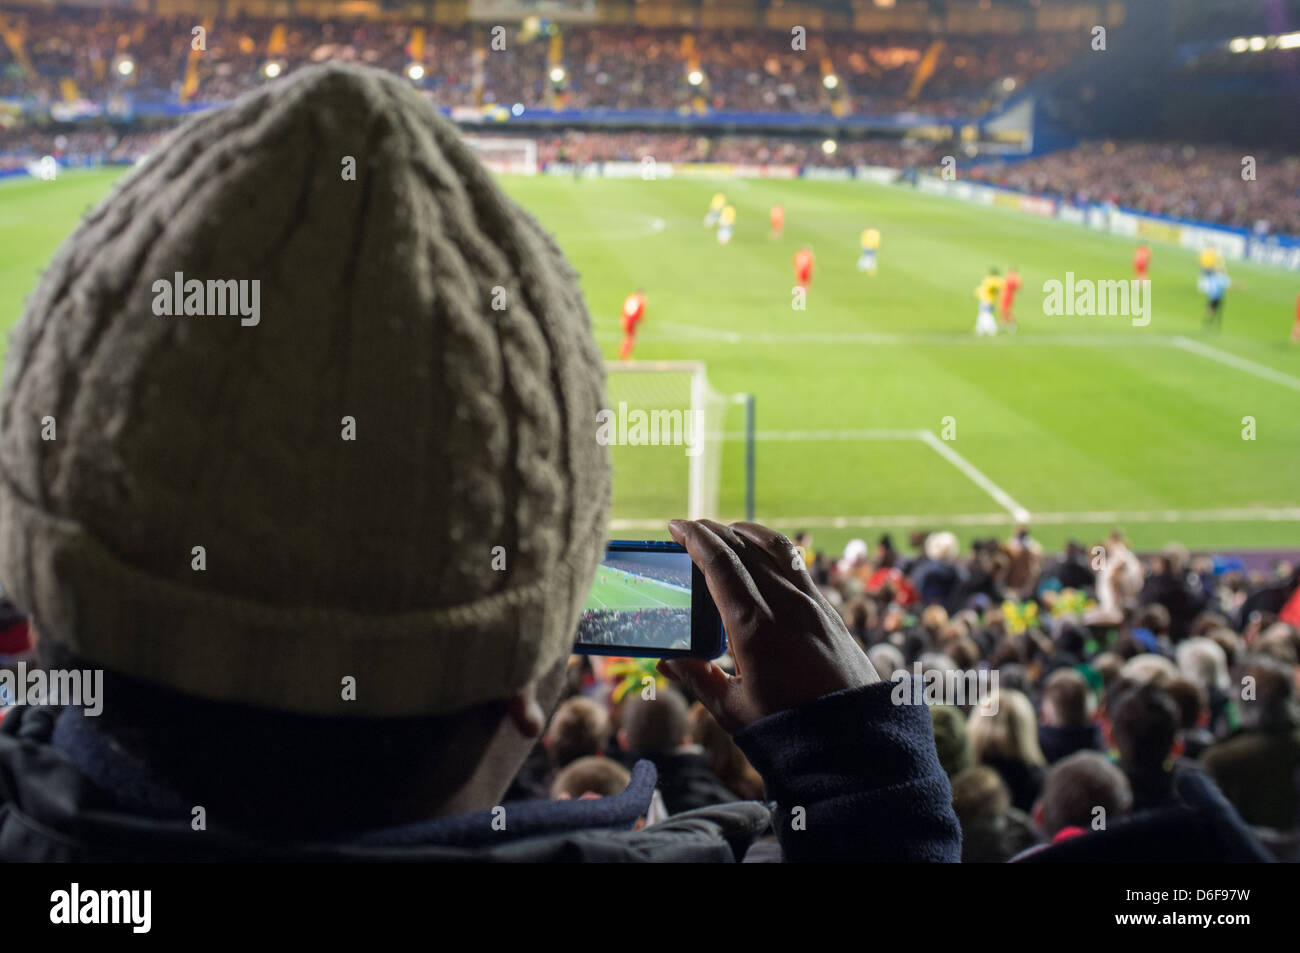 A male spectator takes a picture of a football match on his mobile phone. Stock Photo